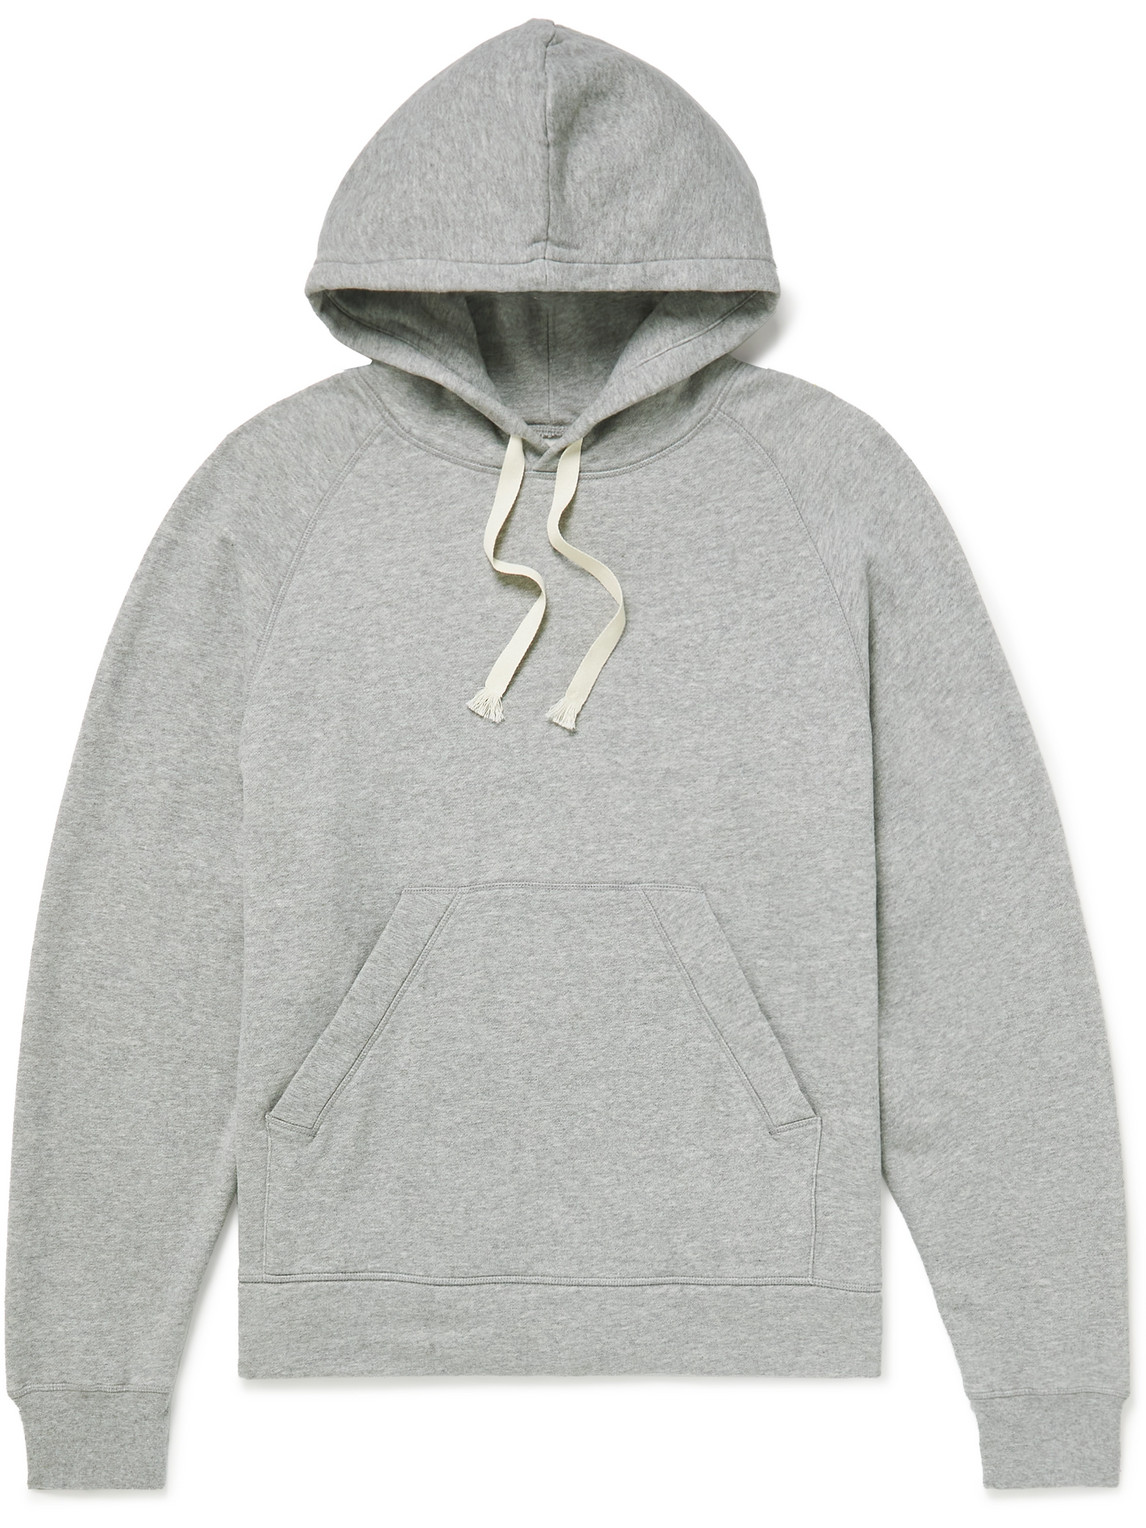 Officine Générale Octave Fringed Cotton and Lyocell-Blend Jersey Hoodie